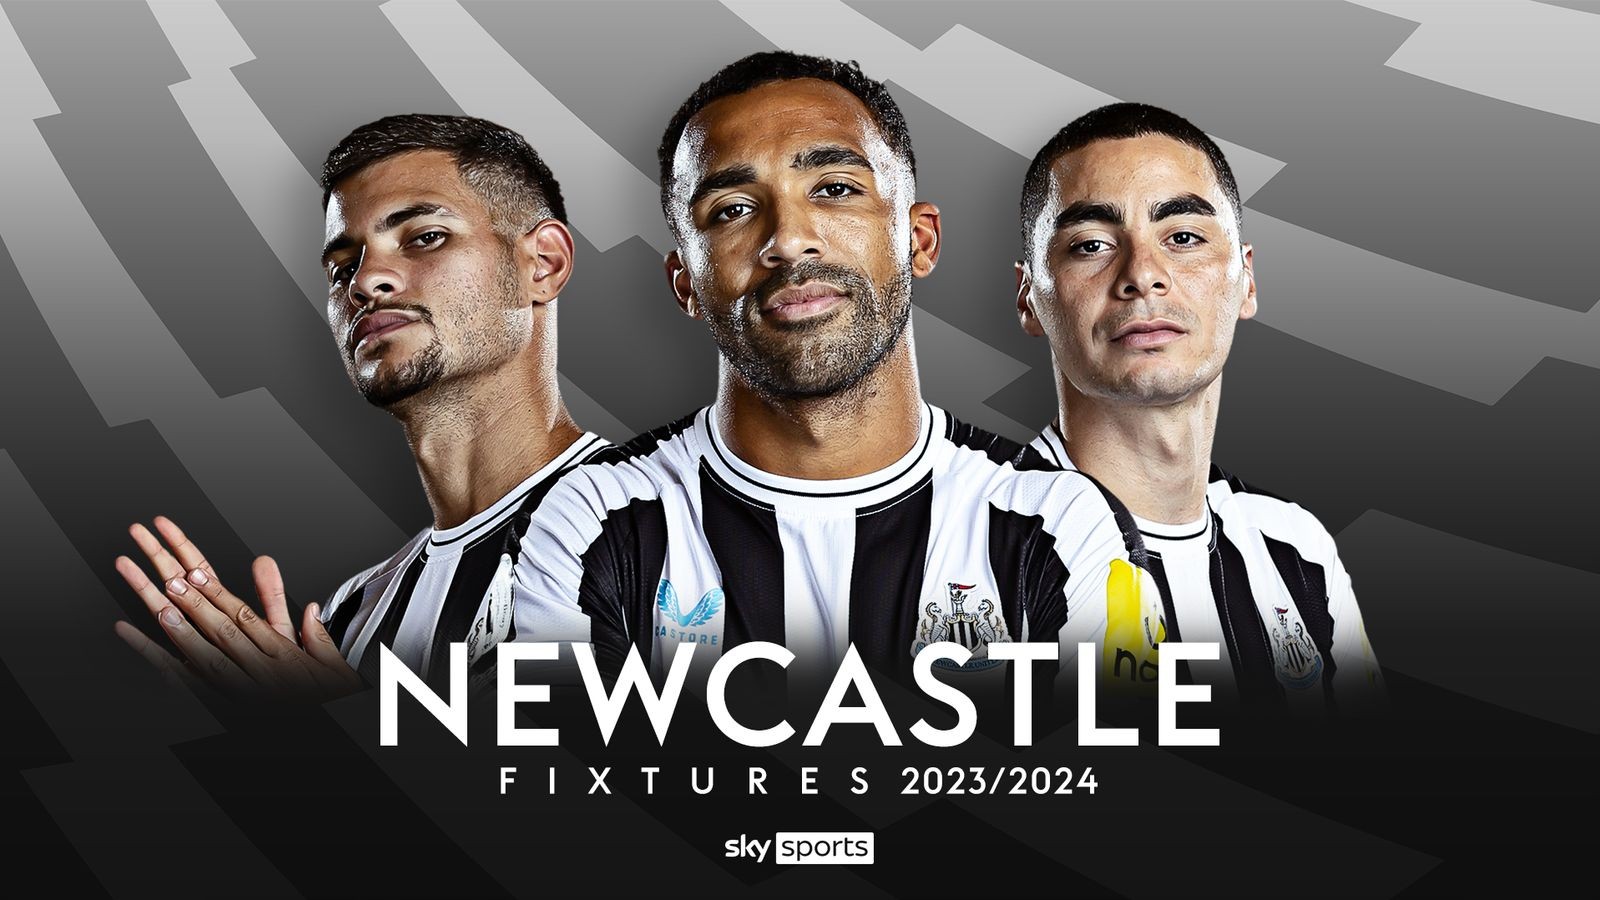 Premier League 2023/2024: Full Fixtures and Biggest Matches of Newcastle United (Update)